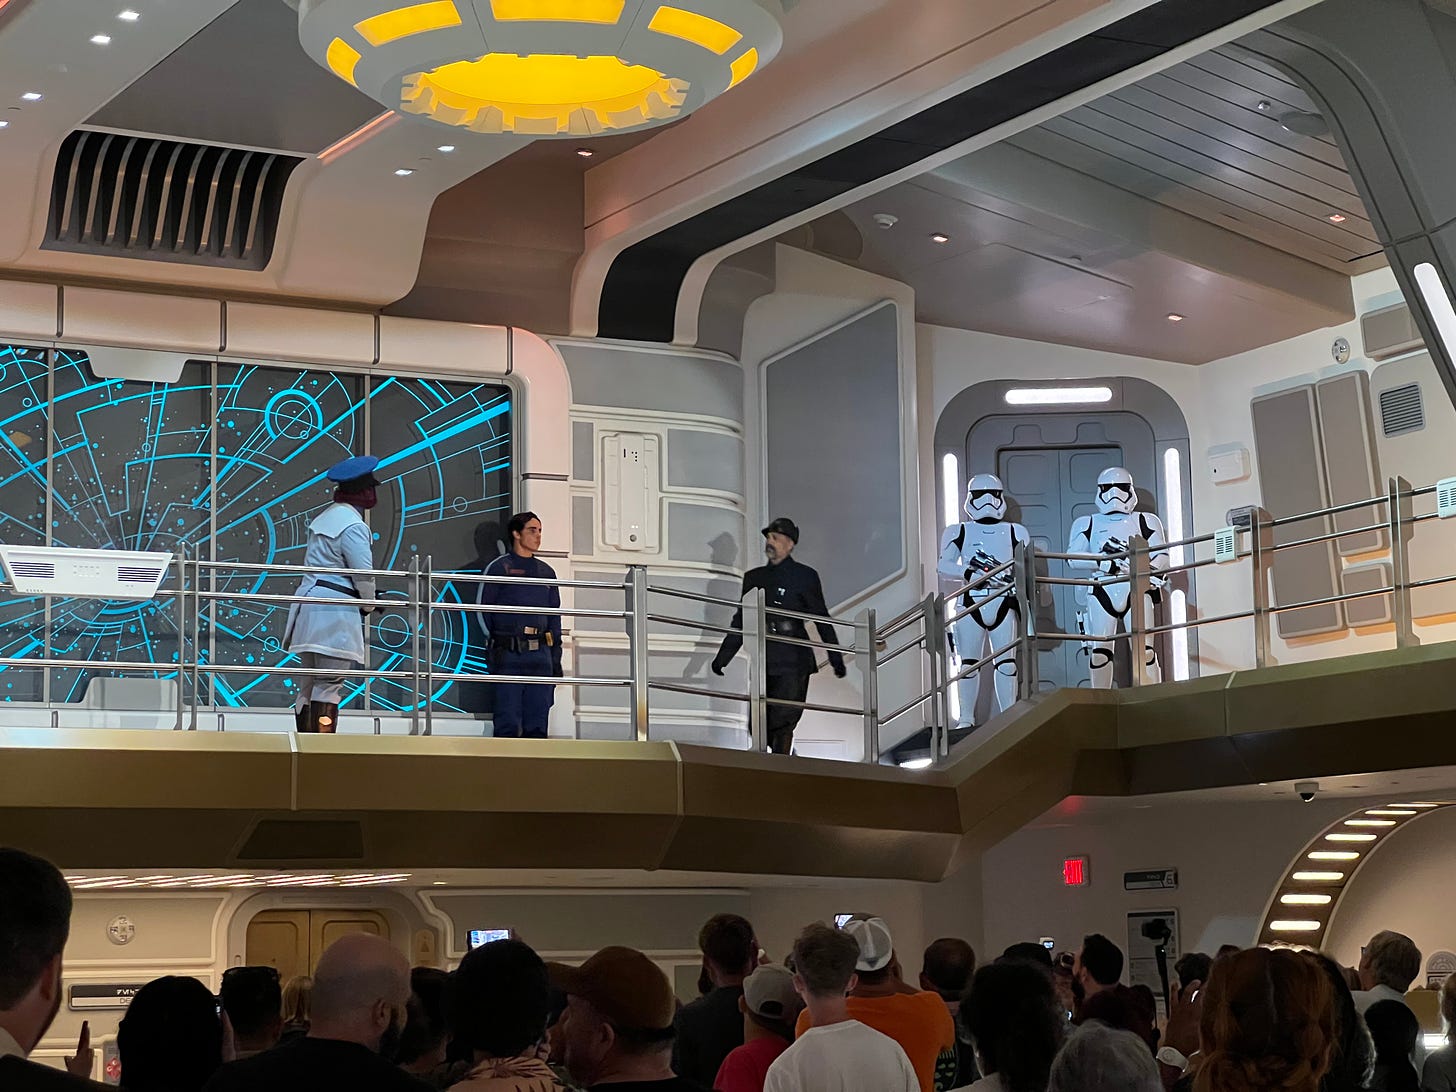 A First Order officer on the atrium walkway, with two stormtroopers behind him